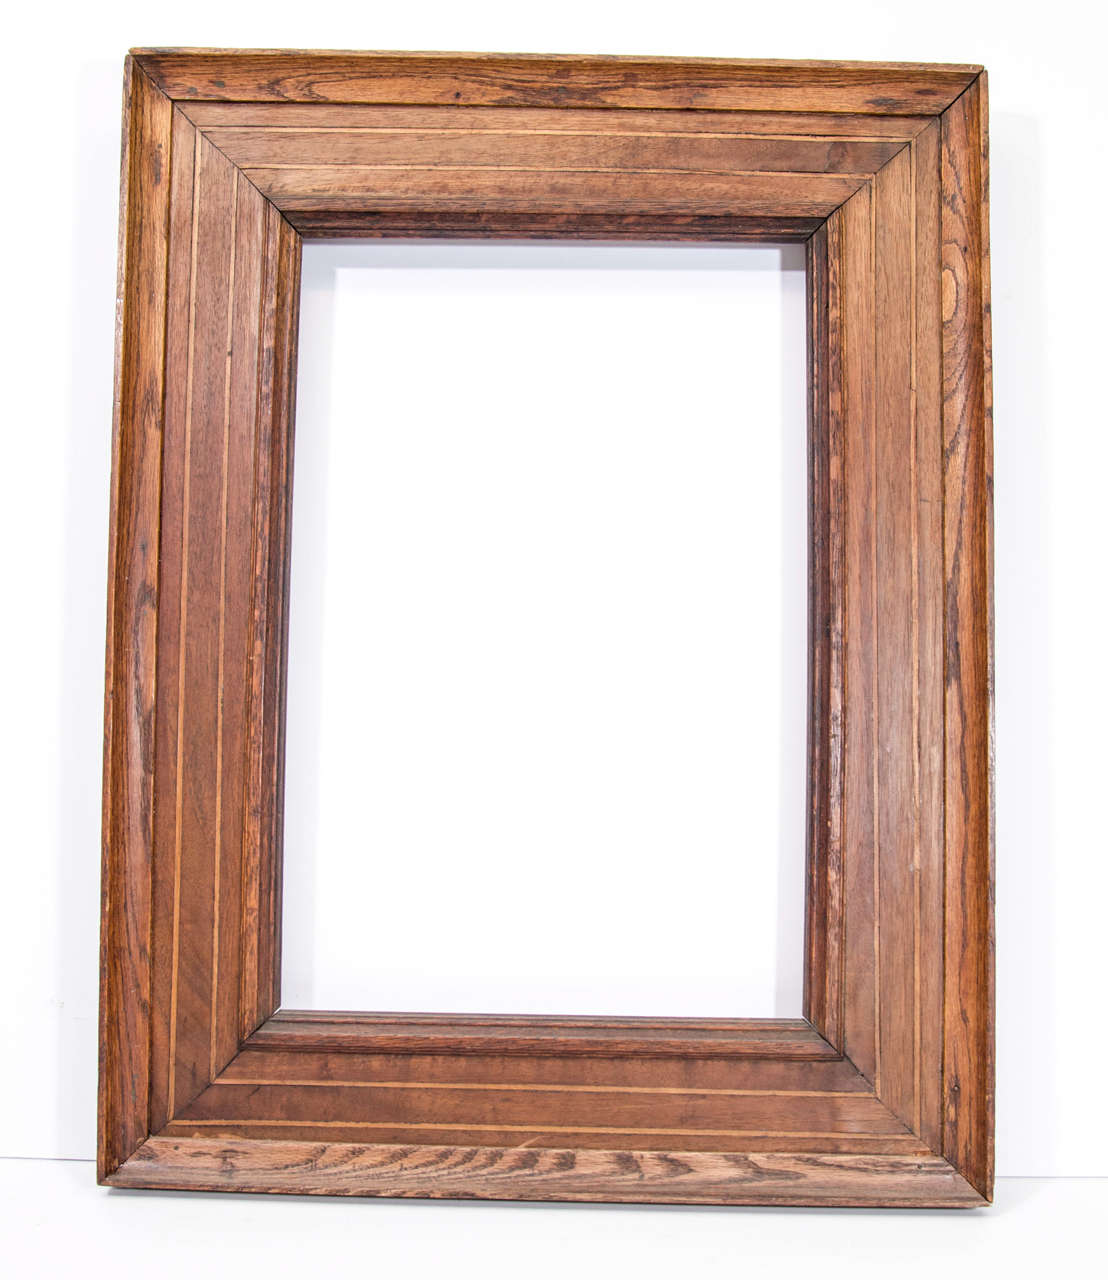 Pine lap jointed frame with applied outer cove and sight edge mouldings in oak, walnut veneer with string inlay, mellow sun faded patina

Exterior dimensions: 20 3/4 x 25 3/4 inches
Rabbet dimensions: 19 1/8 x 13 1/8 inches
Moulding width: 4